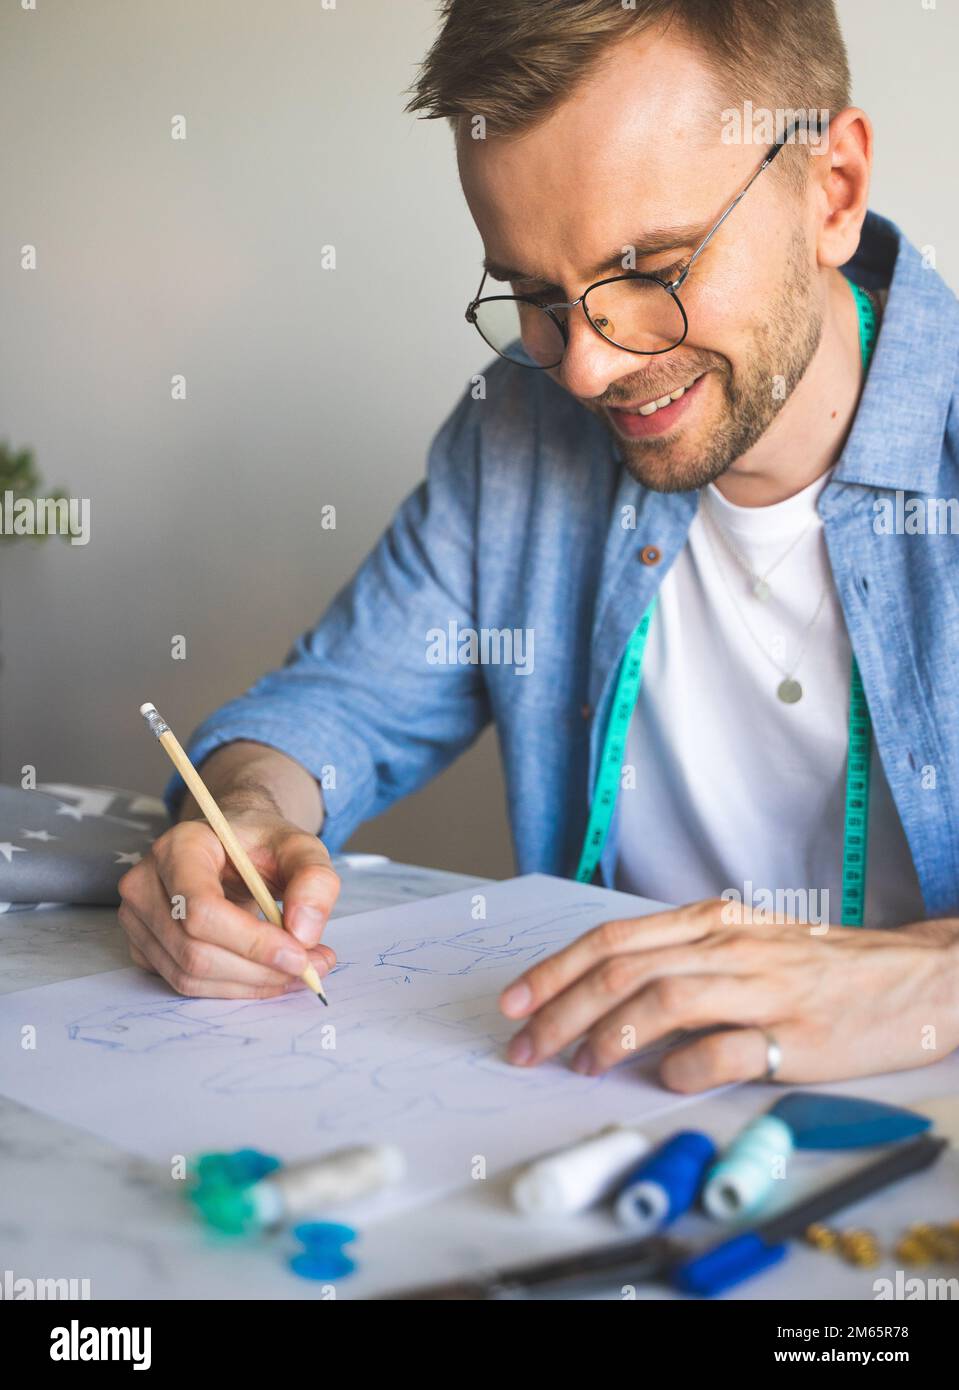 Seamster with glasses is working at the table.DIY designer draws a sketch for a new costume project.Smiling man in a blue shirt makes a sketch Stock Photo